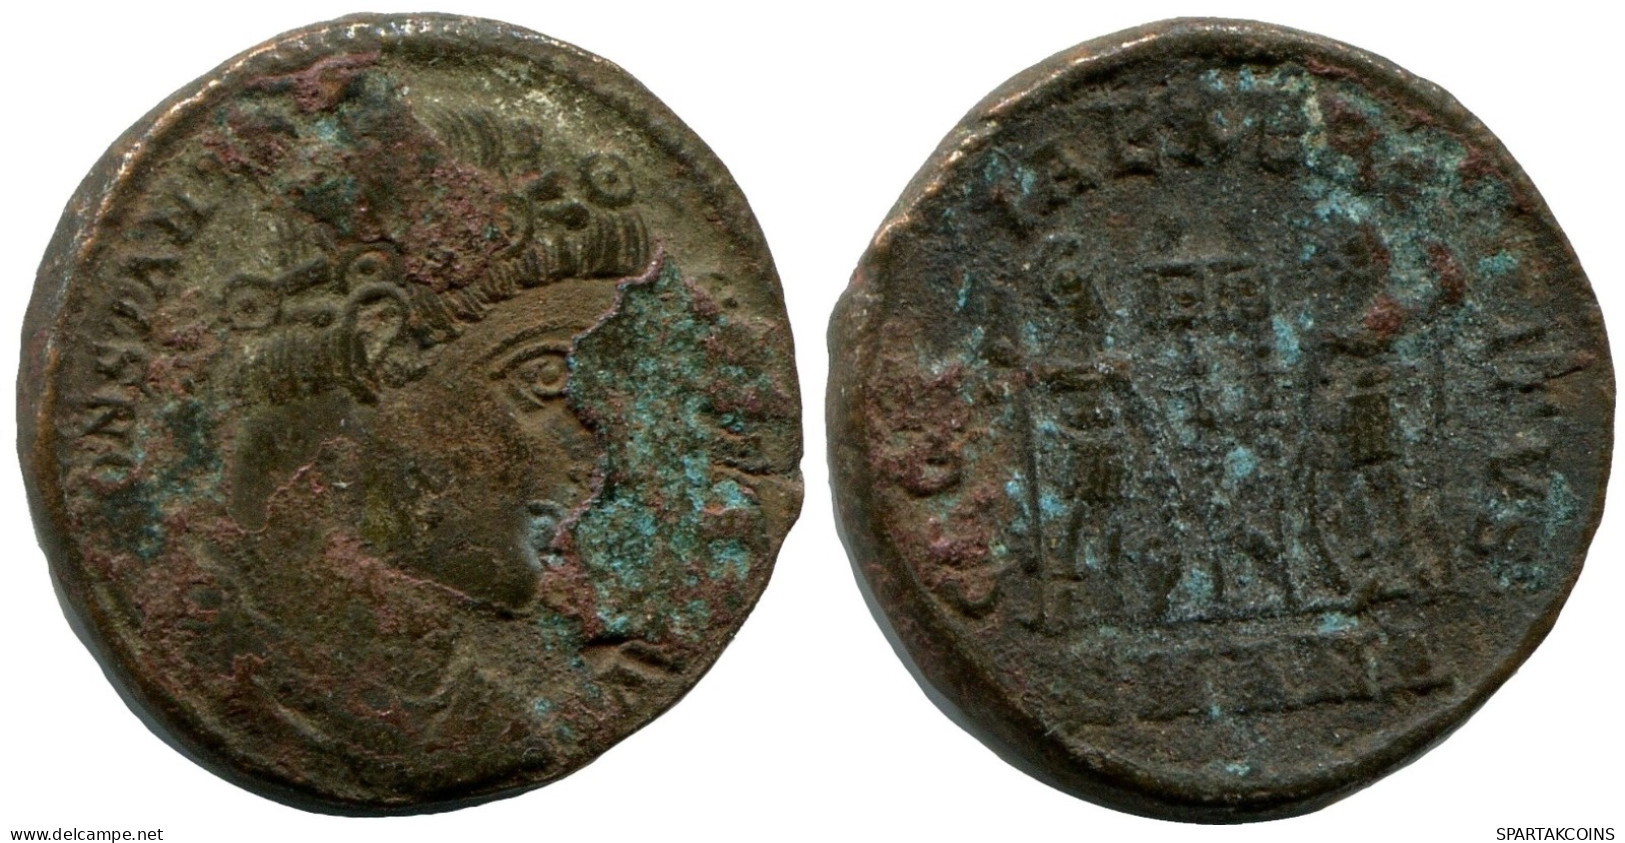 CONSTANTINE I MINTED IN ANTIOCH FOUND IN IHNASYAH HOARD EGYPT #ANC10618.14.D.A - The Christian Empire (307 AD To 363 AD)